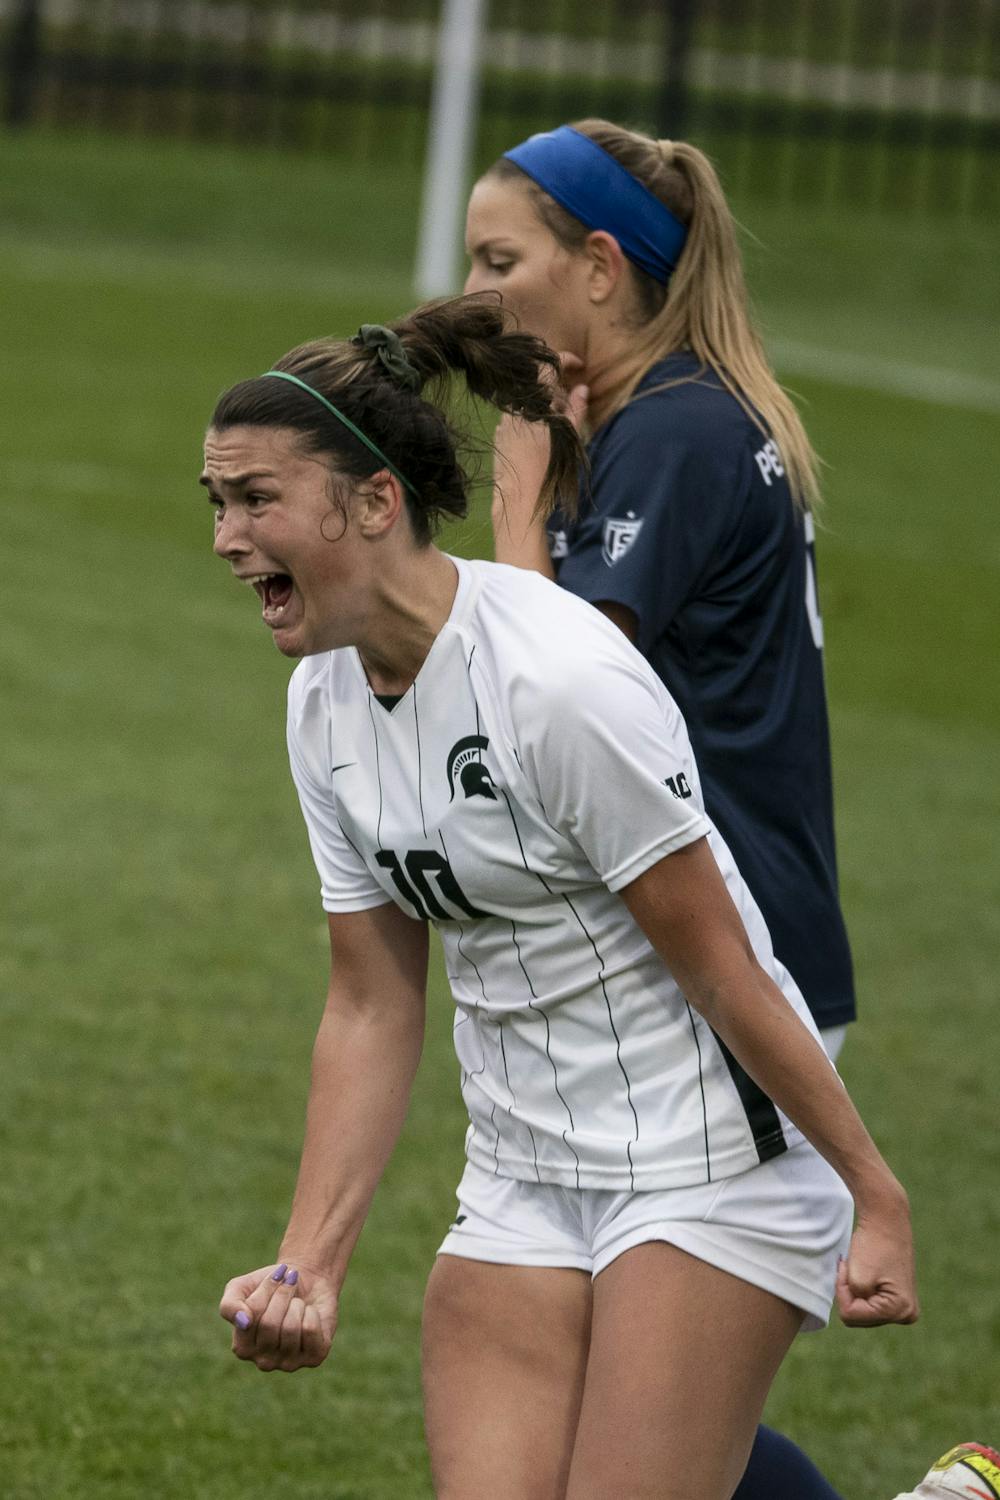 <p>Senior forward Camryn Evans (10) yells in excitement after scoring a goal during the game against Penn State on Oct. 24, 2021. The Spartans were defeated by the Nittany Lions 1-2.</p>